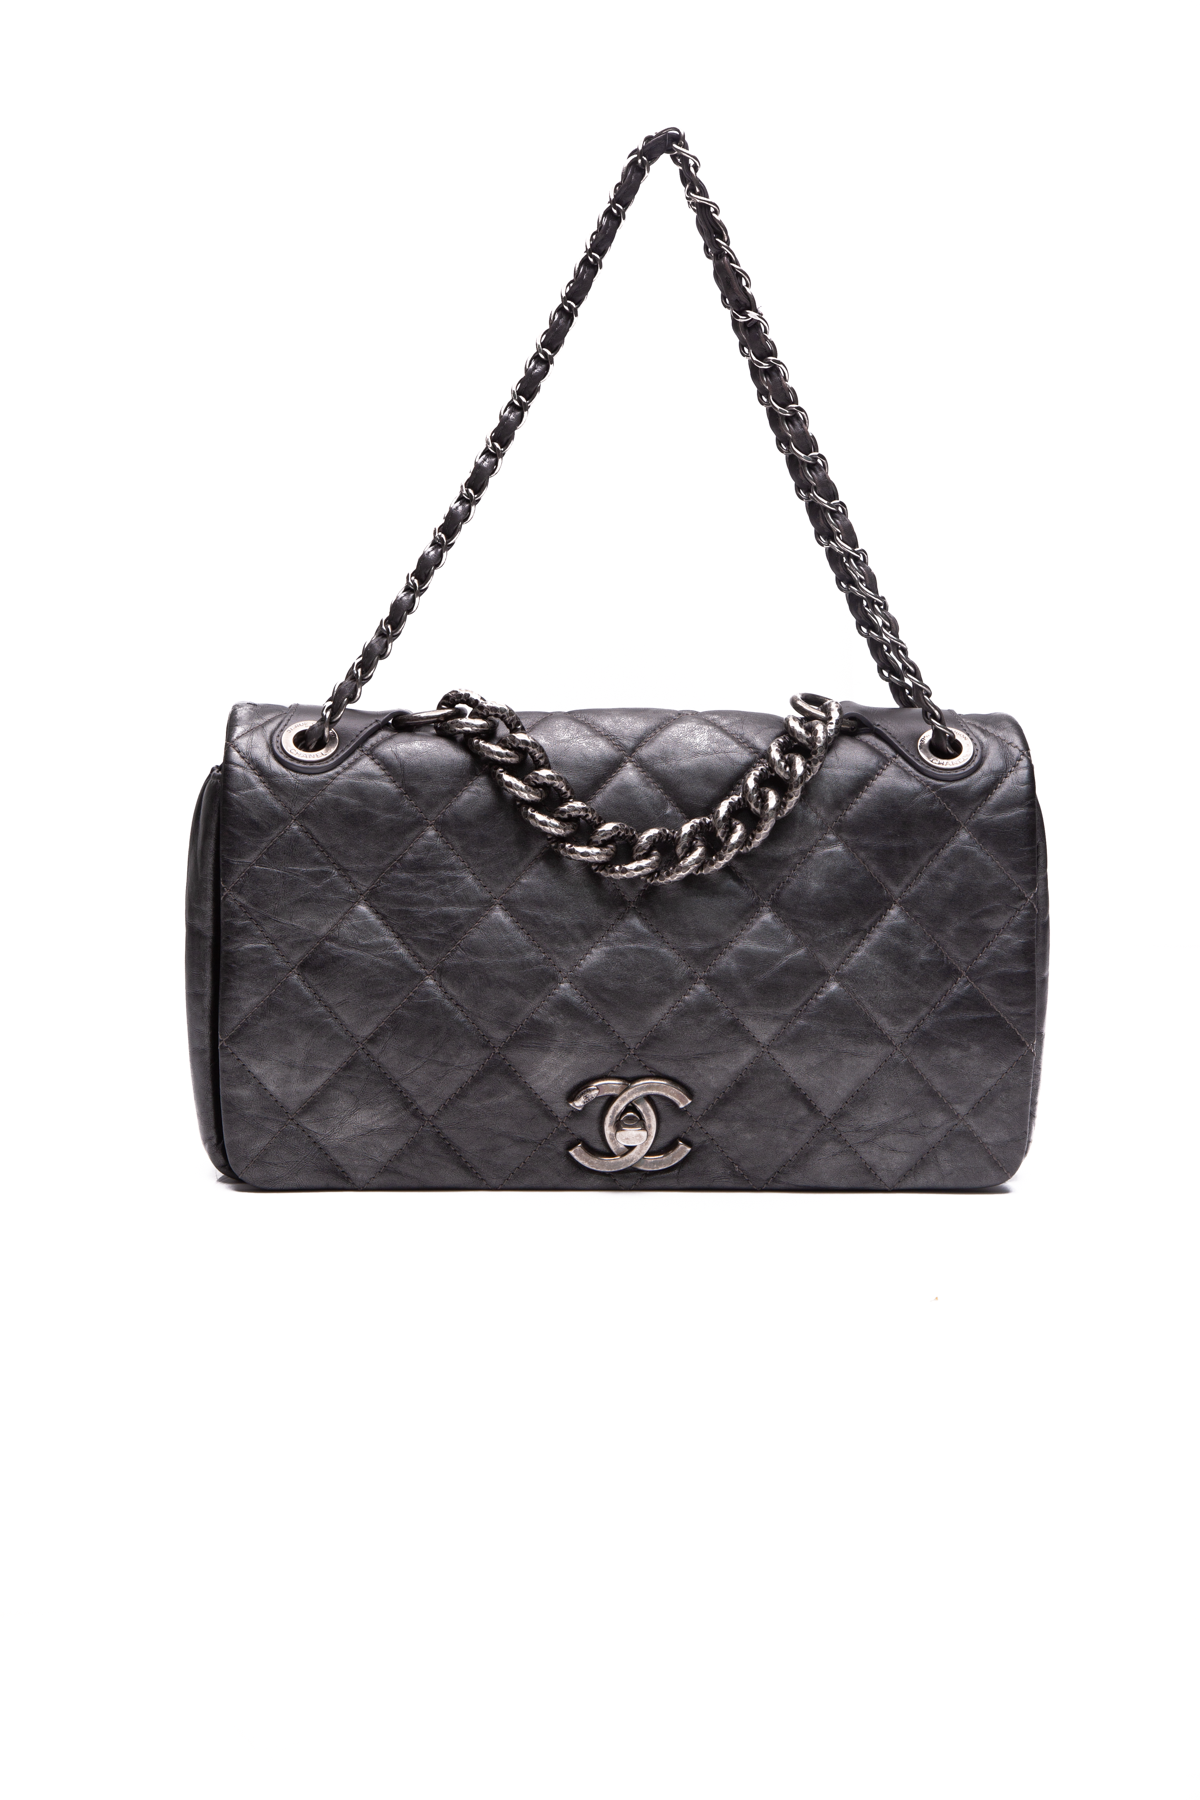 Chanel authentication - Mini Bag. Any help is appreciated! : r/chanel